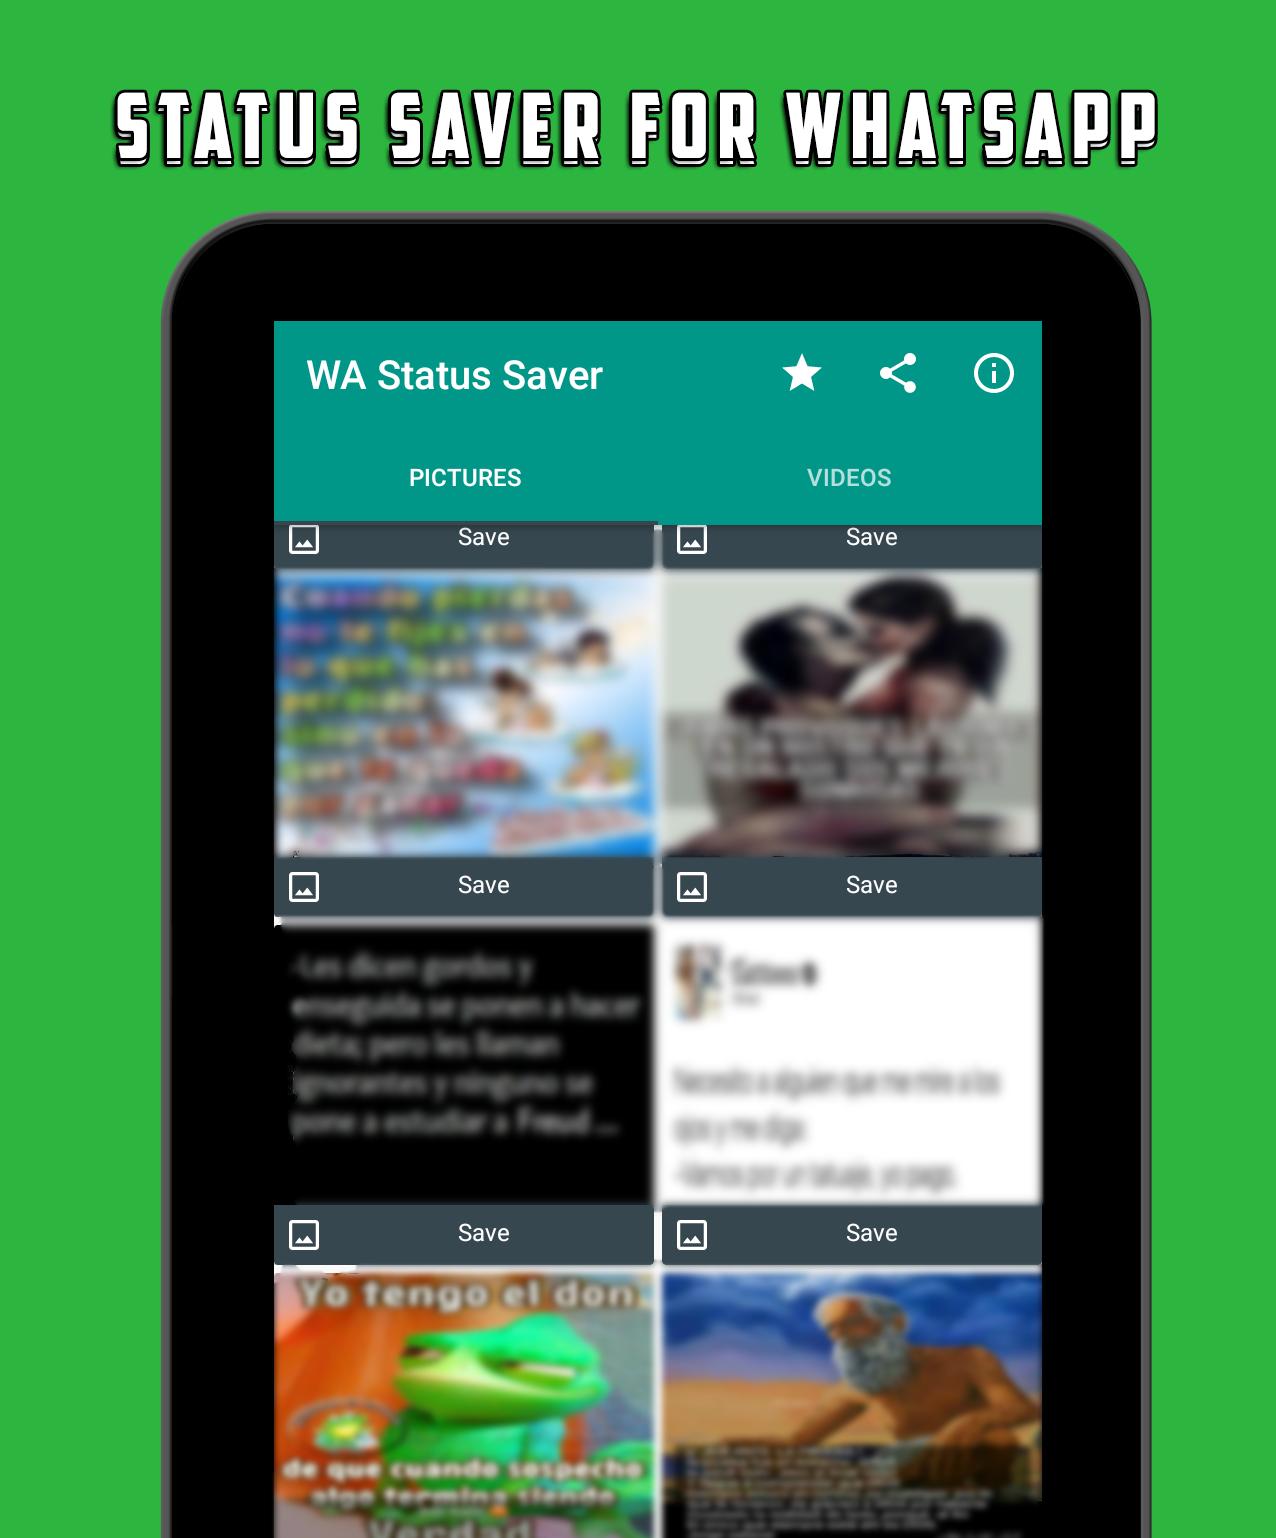  Status  Saver  For Whatsapp  for Android APK  Download 